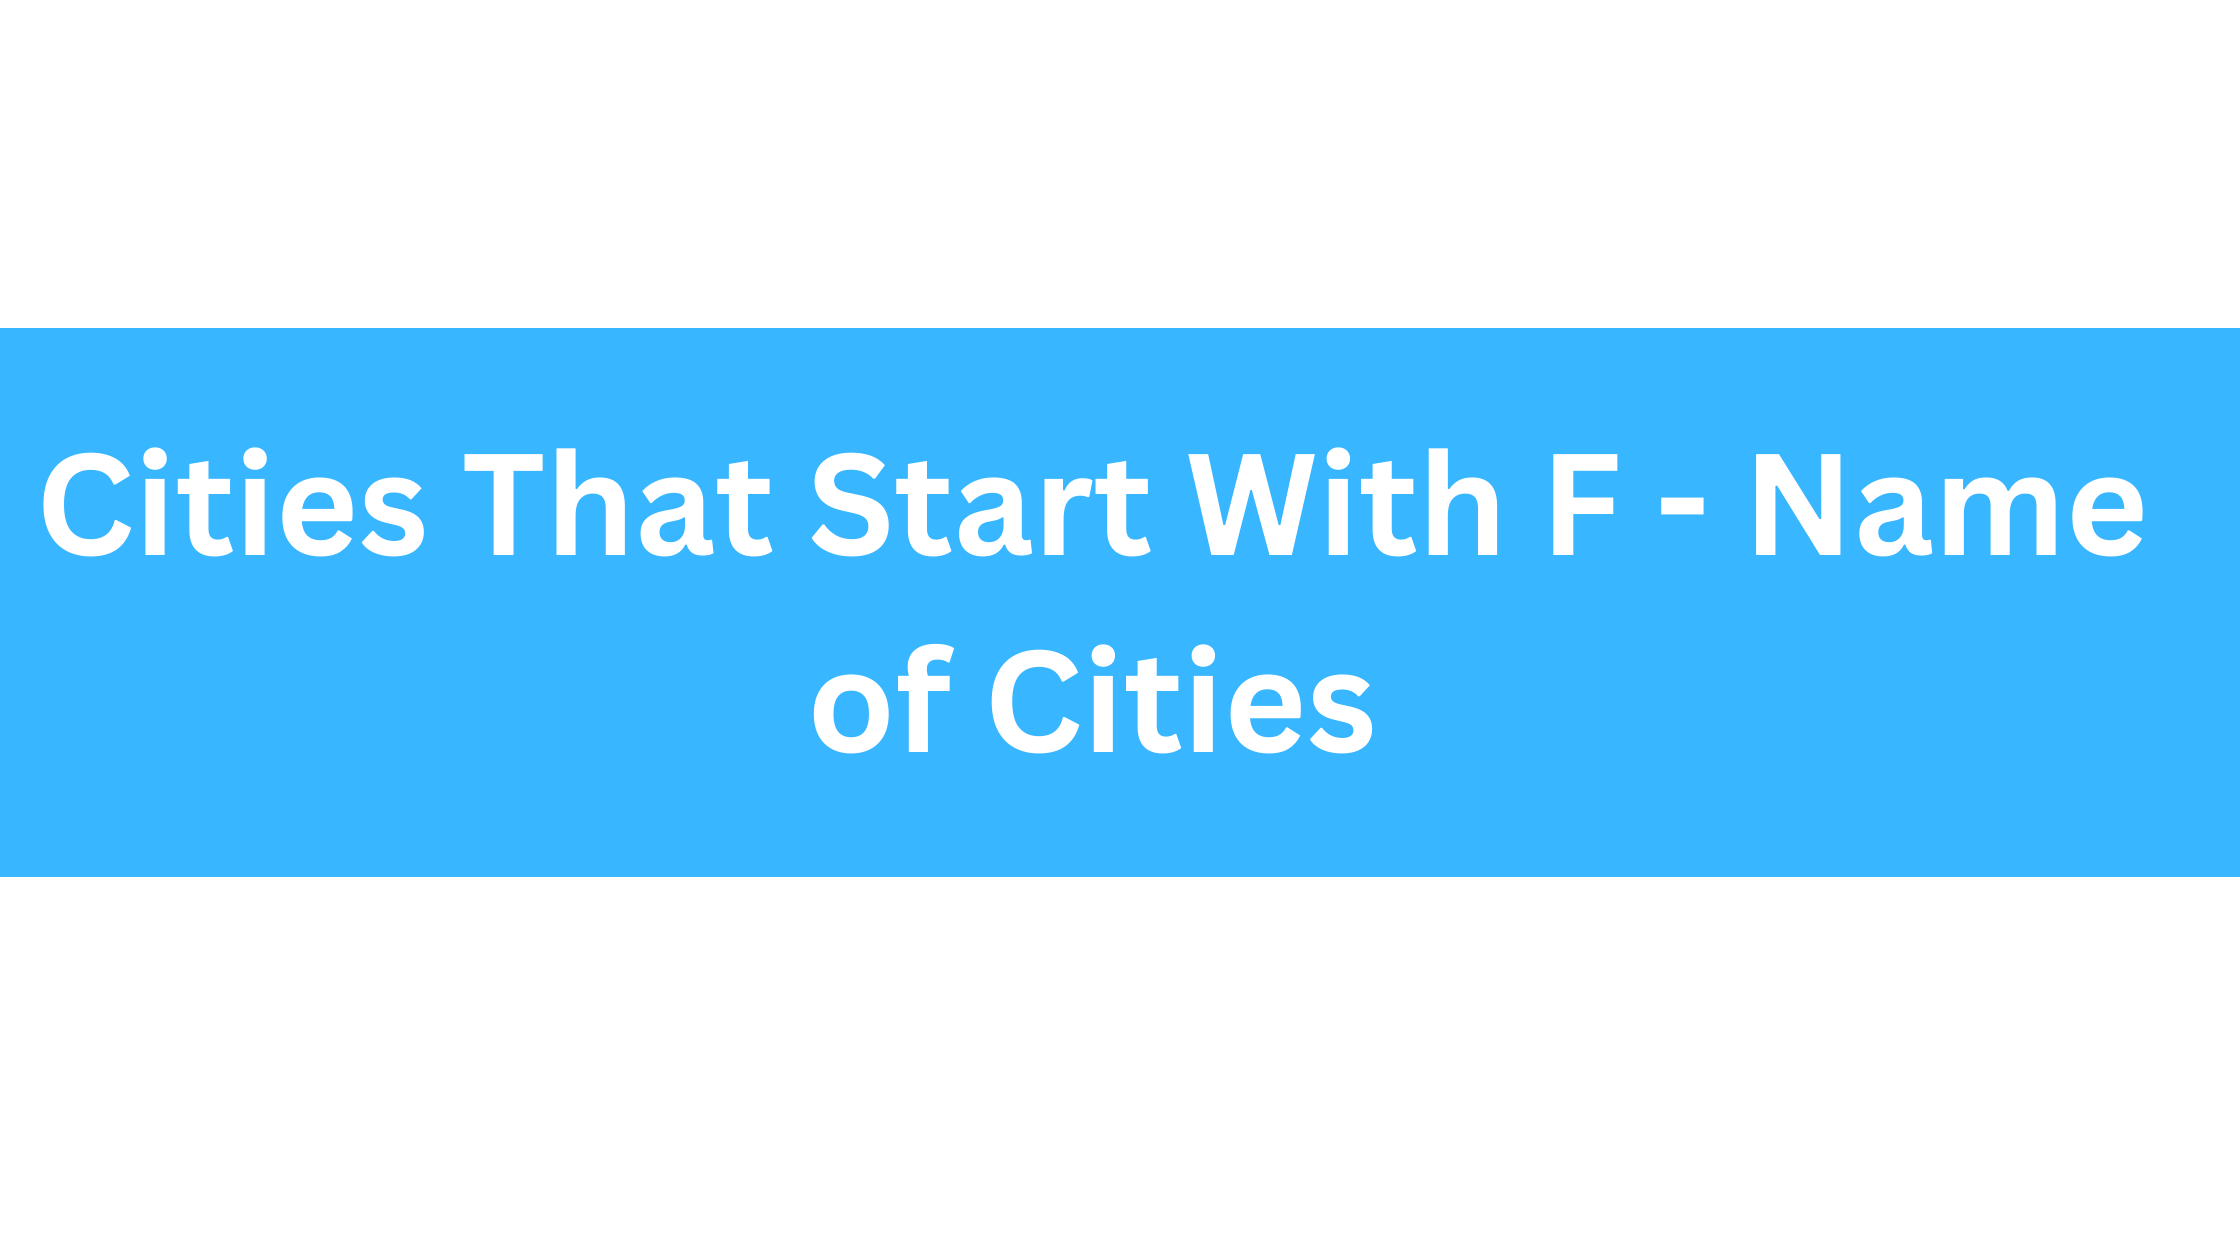 Cities That Start With F